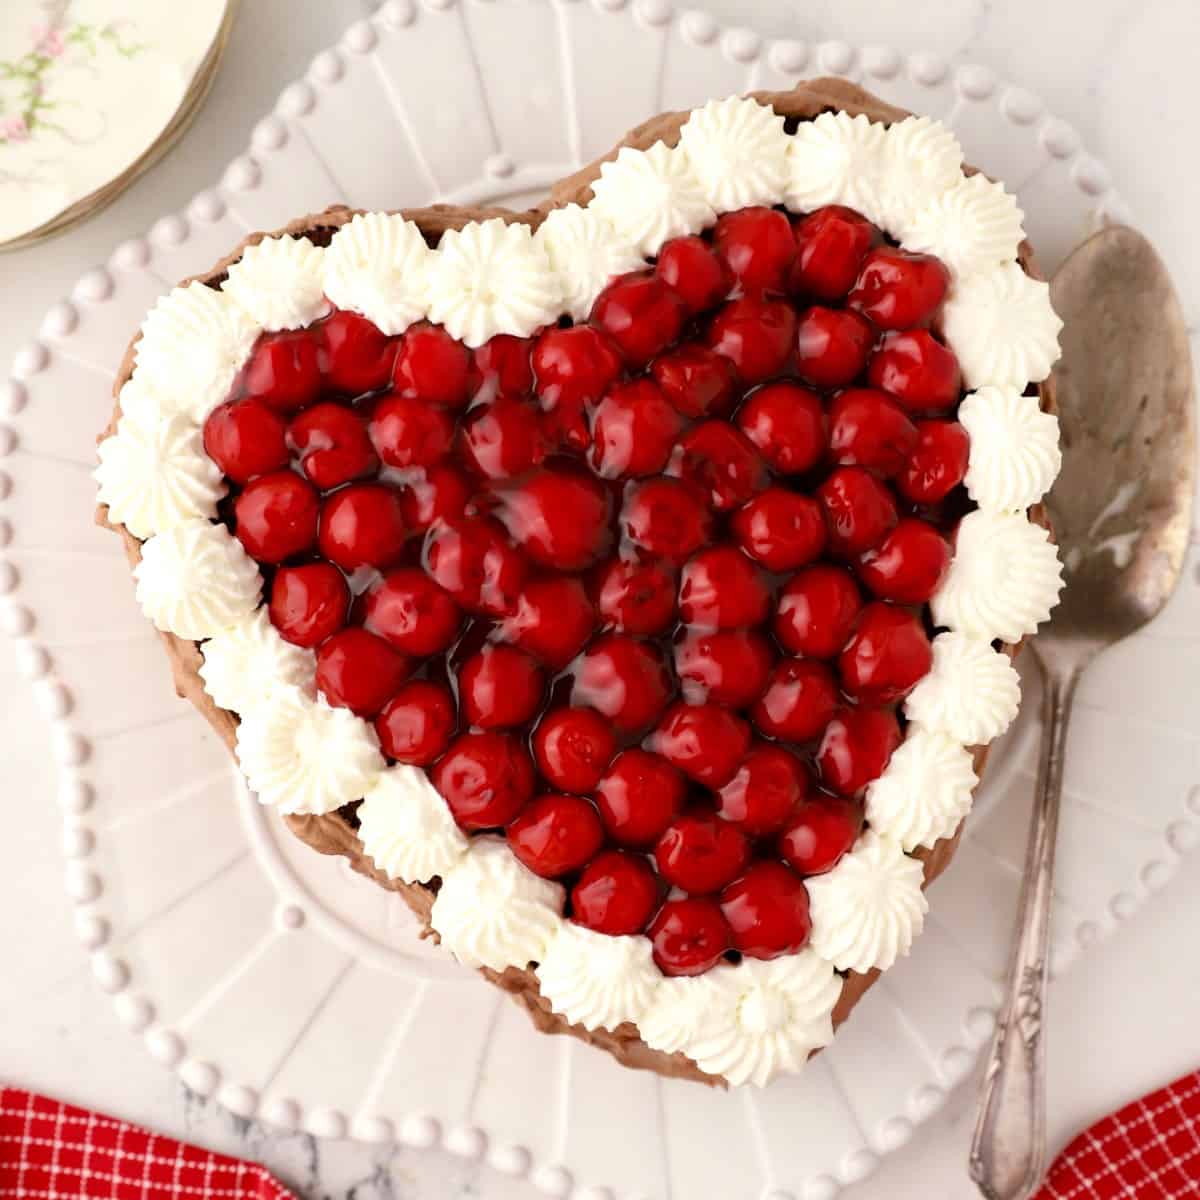 Heart-Shaped Chocolate Cake with Cherries - Grits and Pinecones